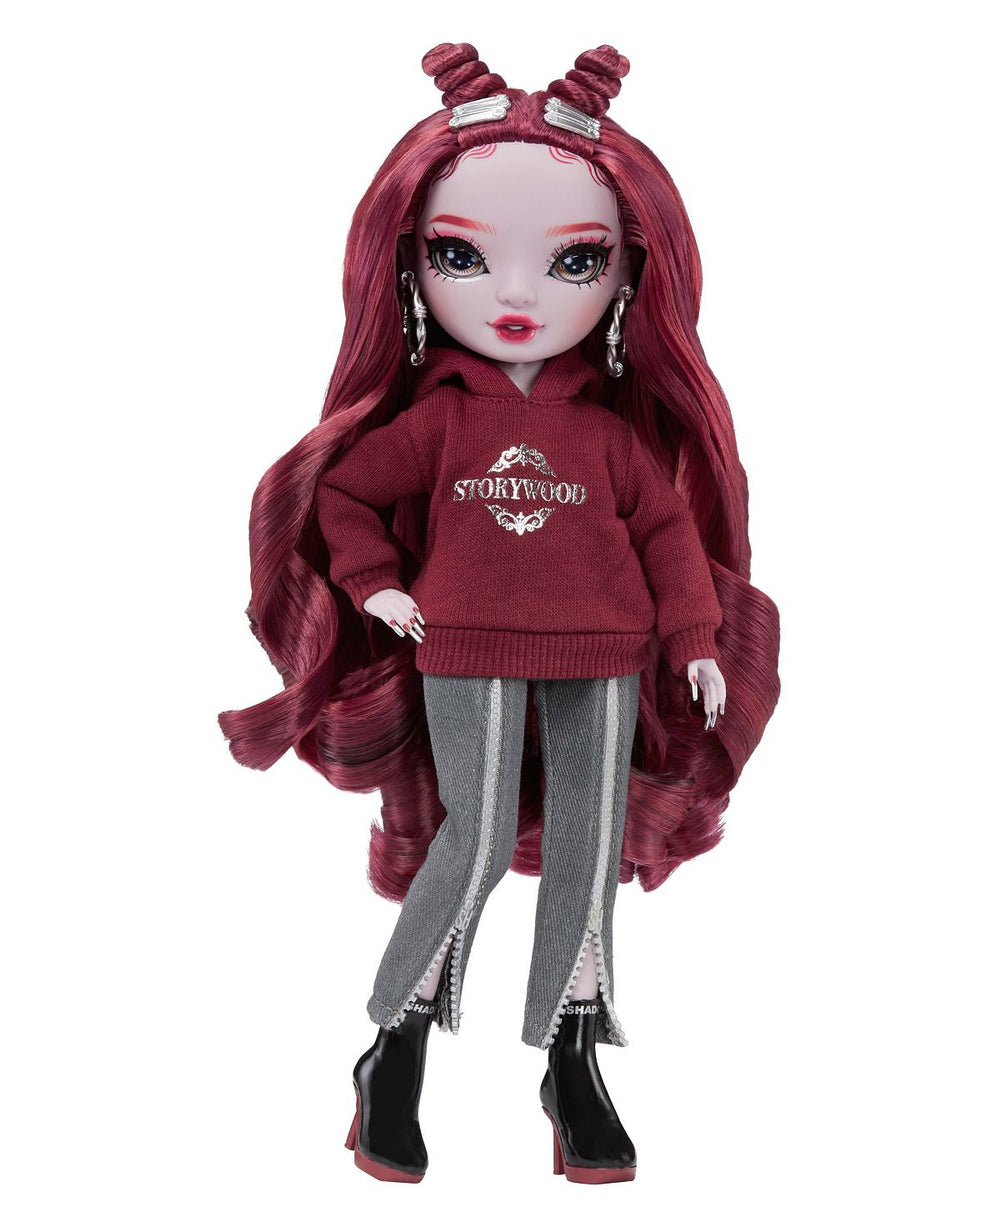 Rainbow High Fashion Doll - Scarlet Rose with Maroon Outfit